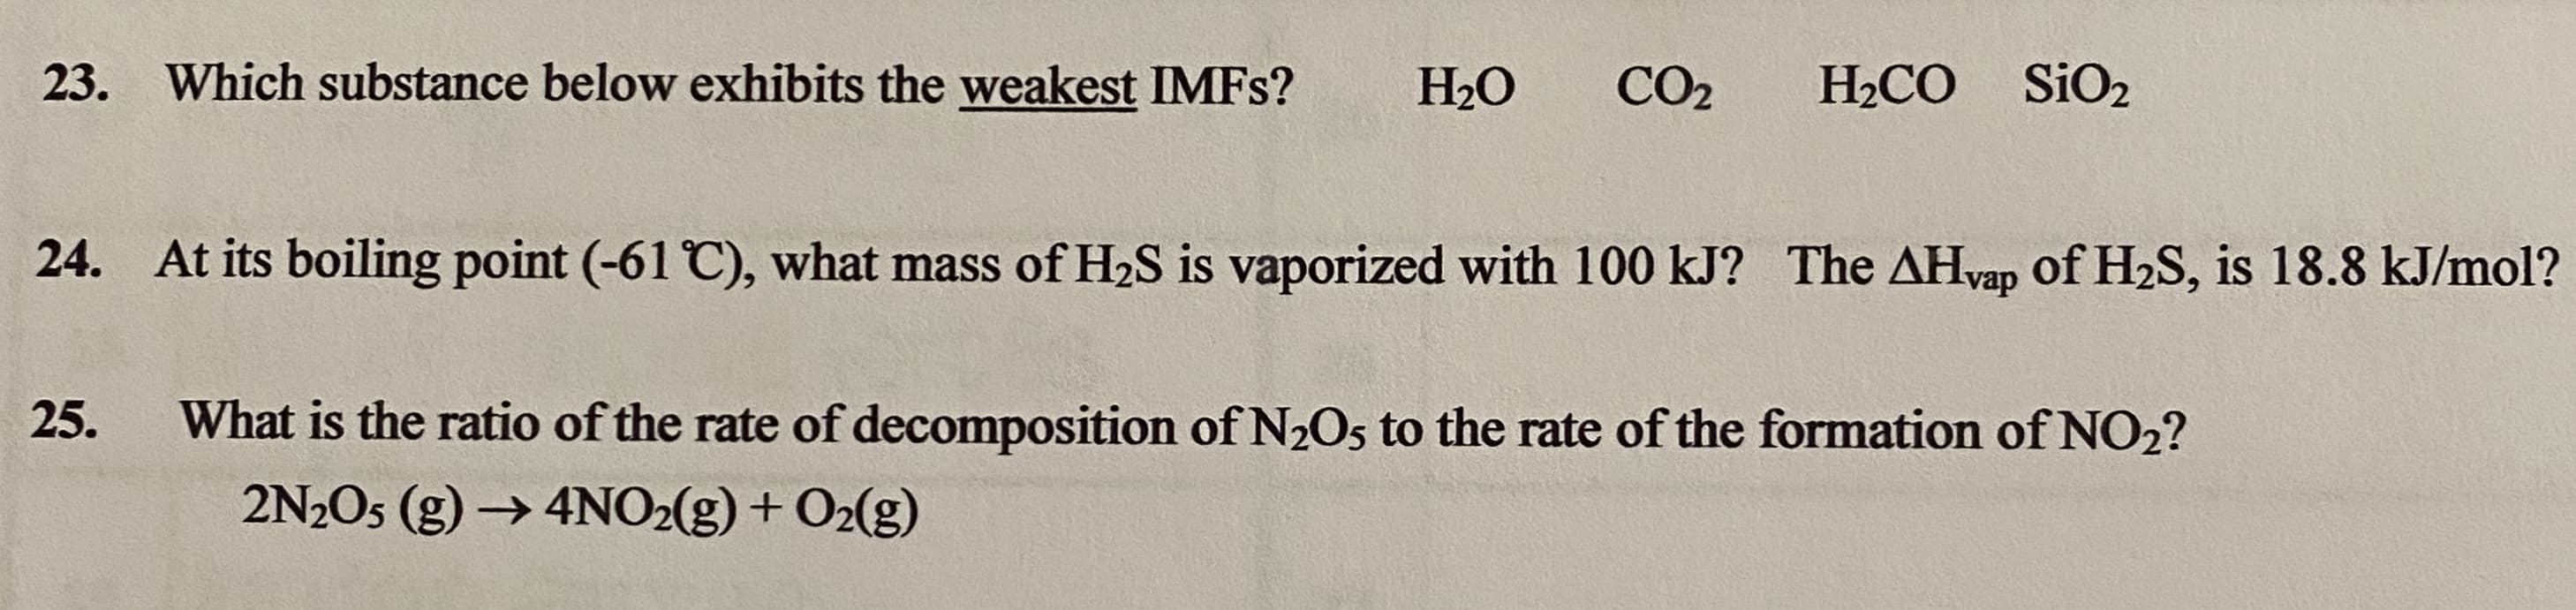 23. Which substance below exhibits the weakest IMFS?
H2O
CO2
H2CO SiO2
